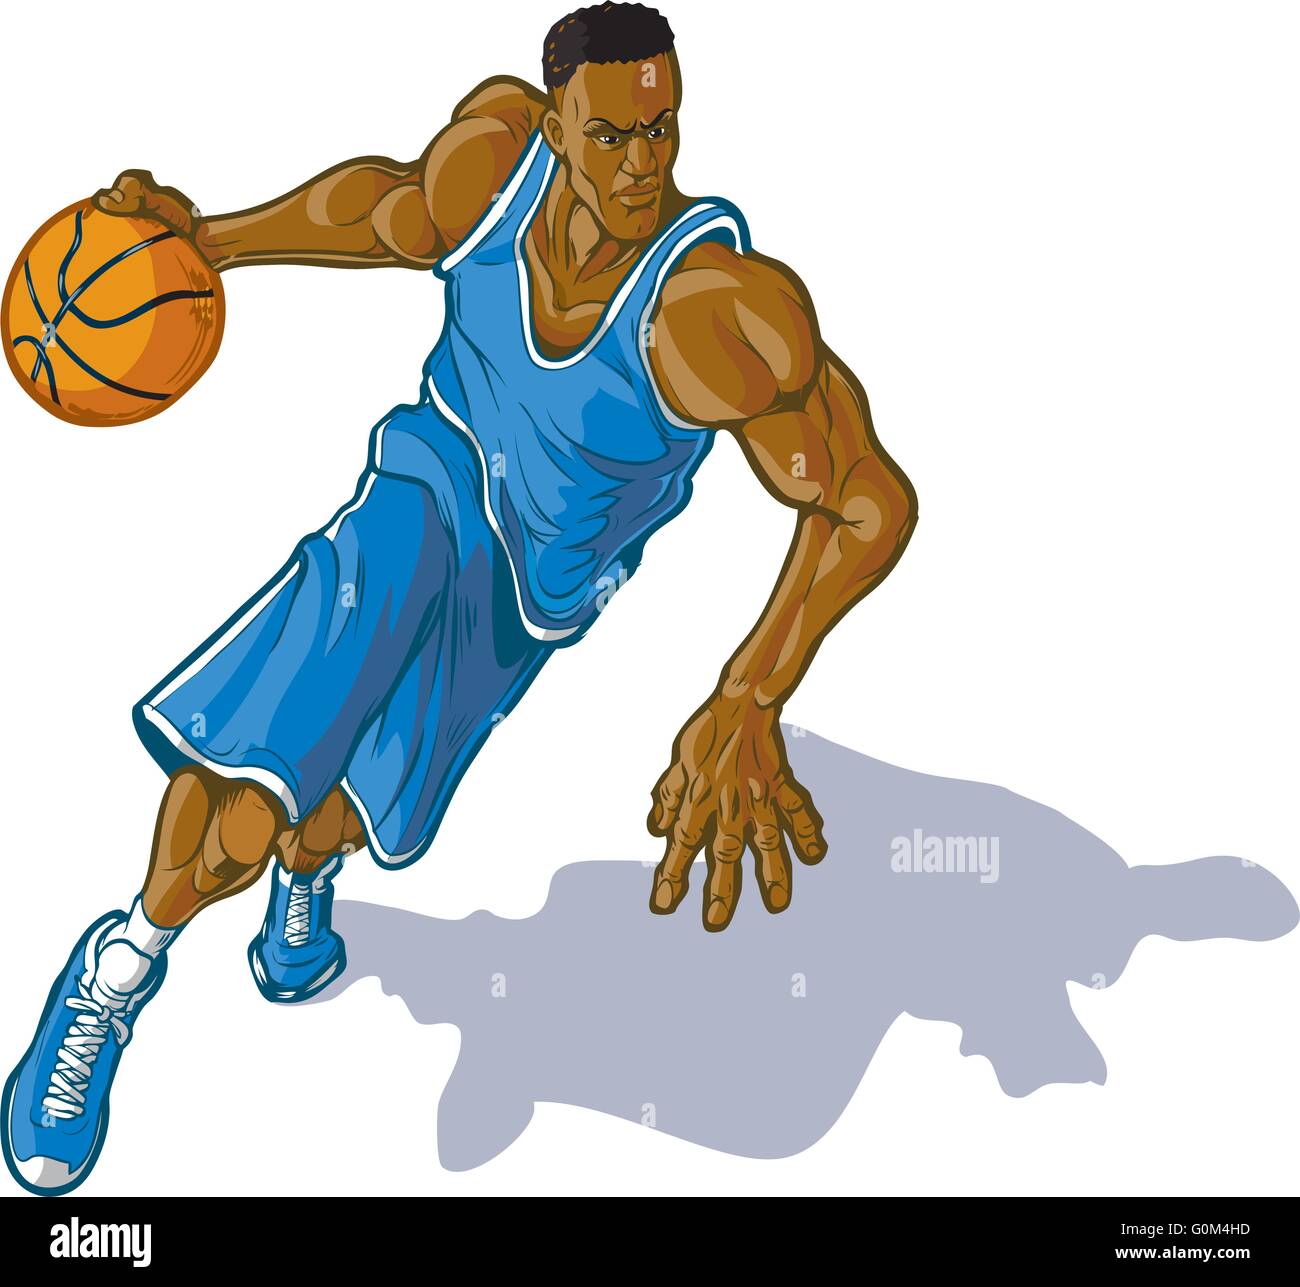 Crossover dribble basketball Stock Vector Images - Alamy